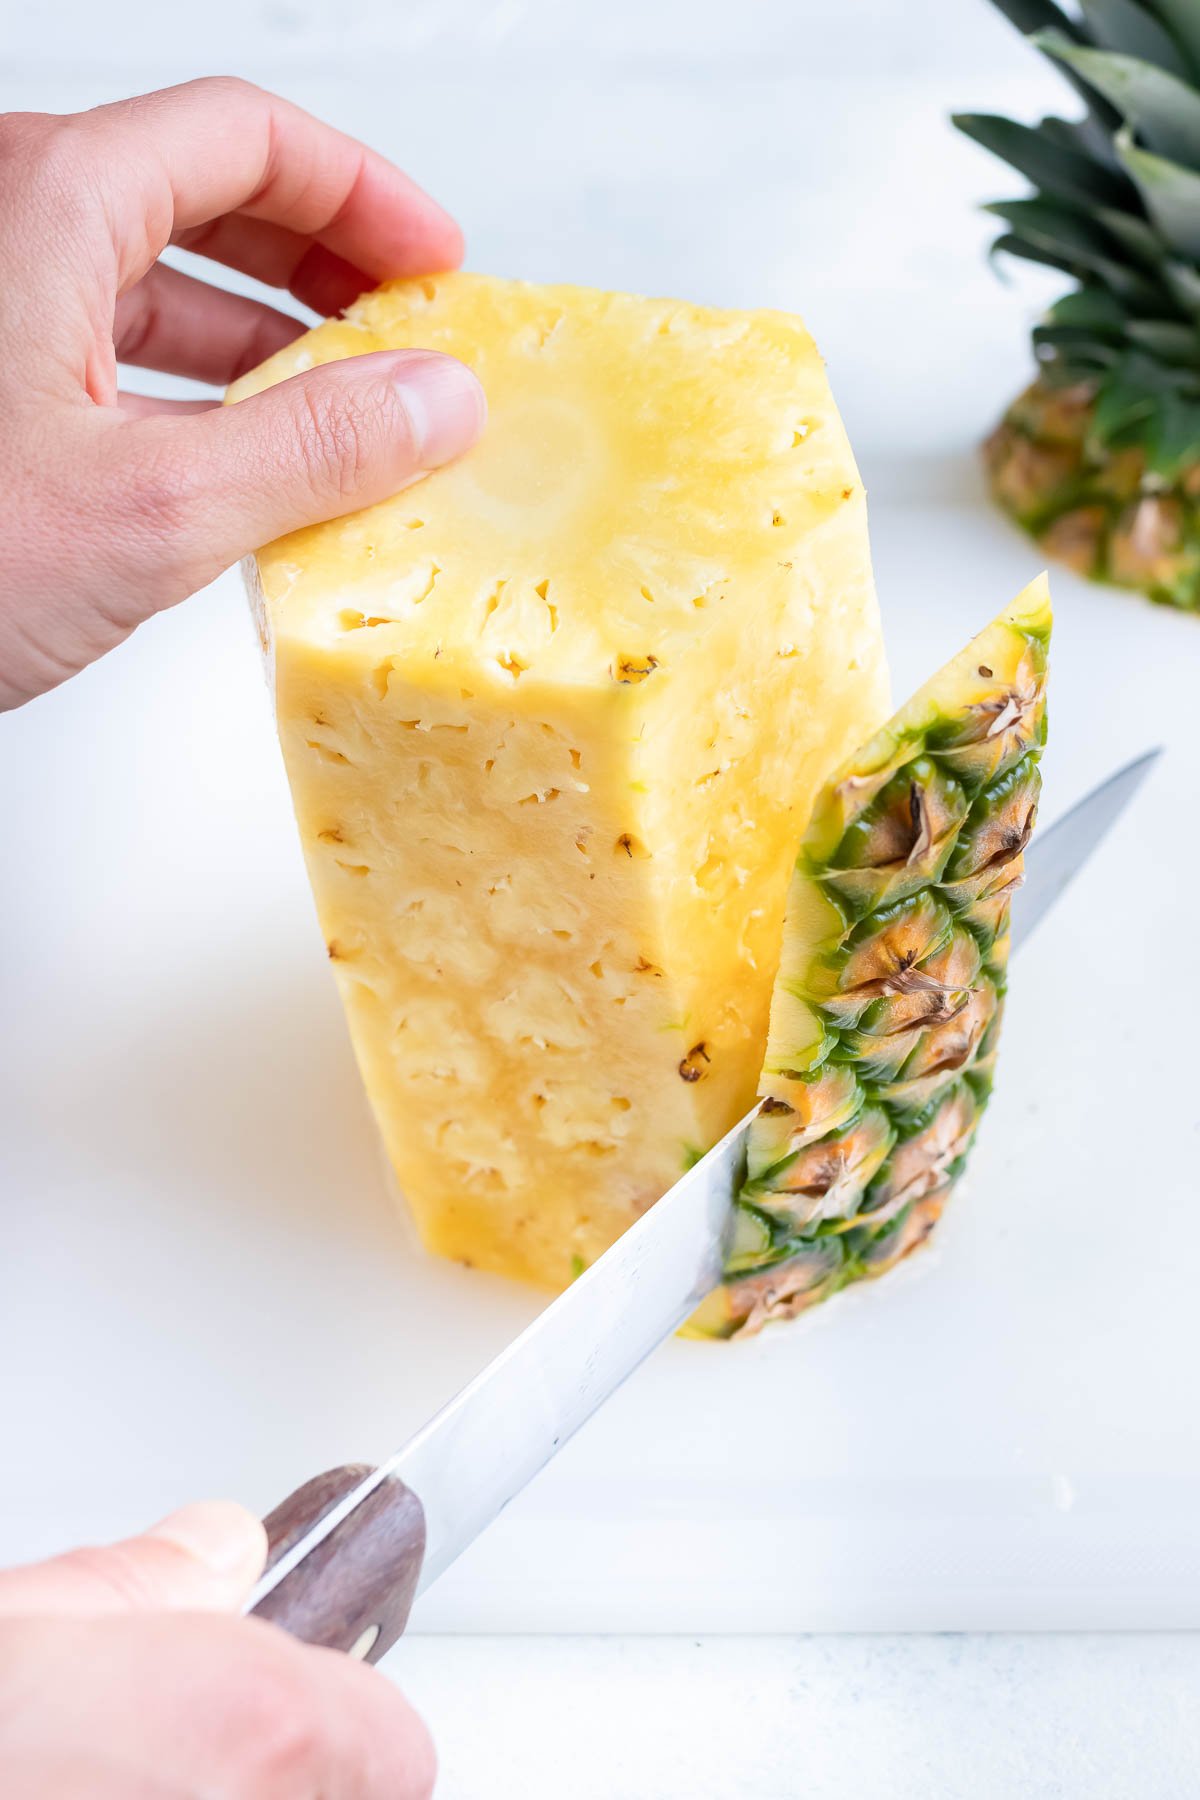 The whole pineapple skin is removed with a knife.